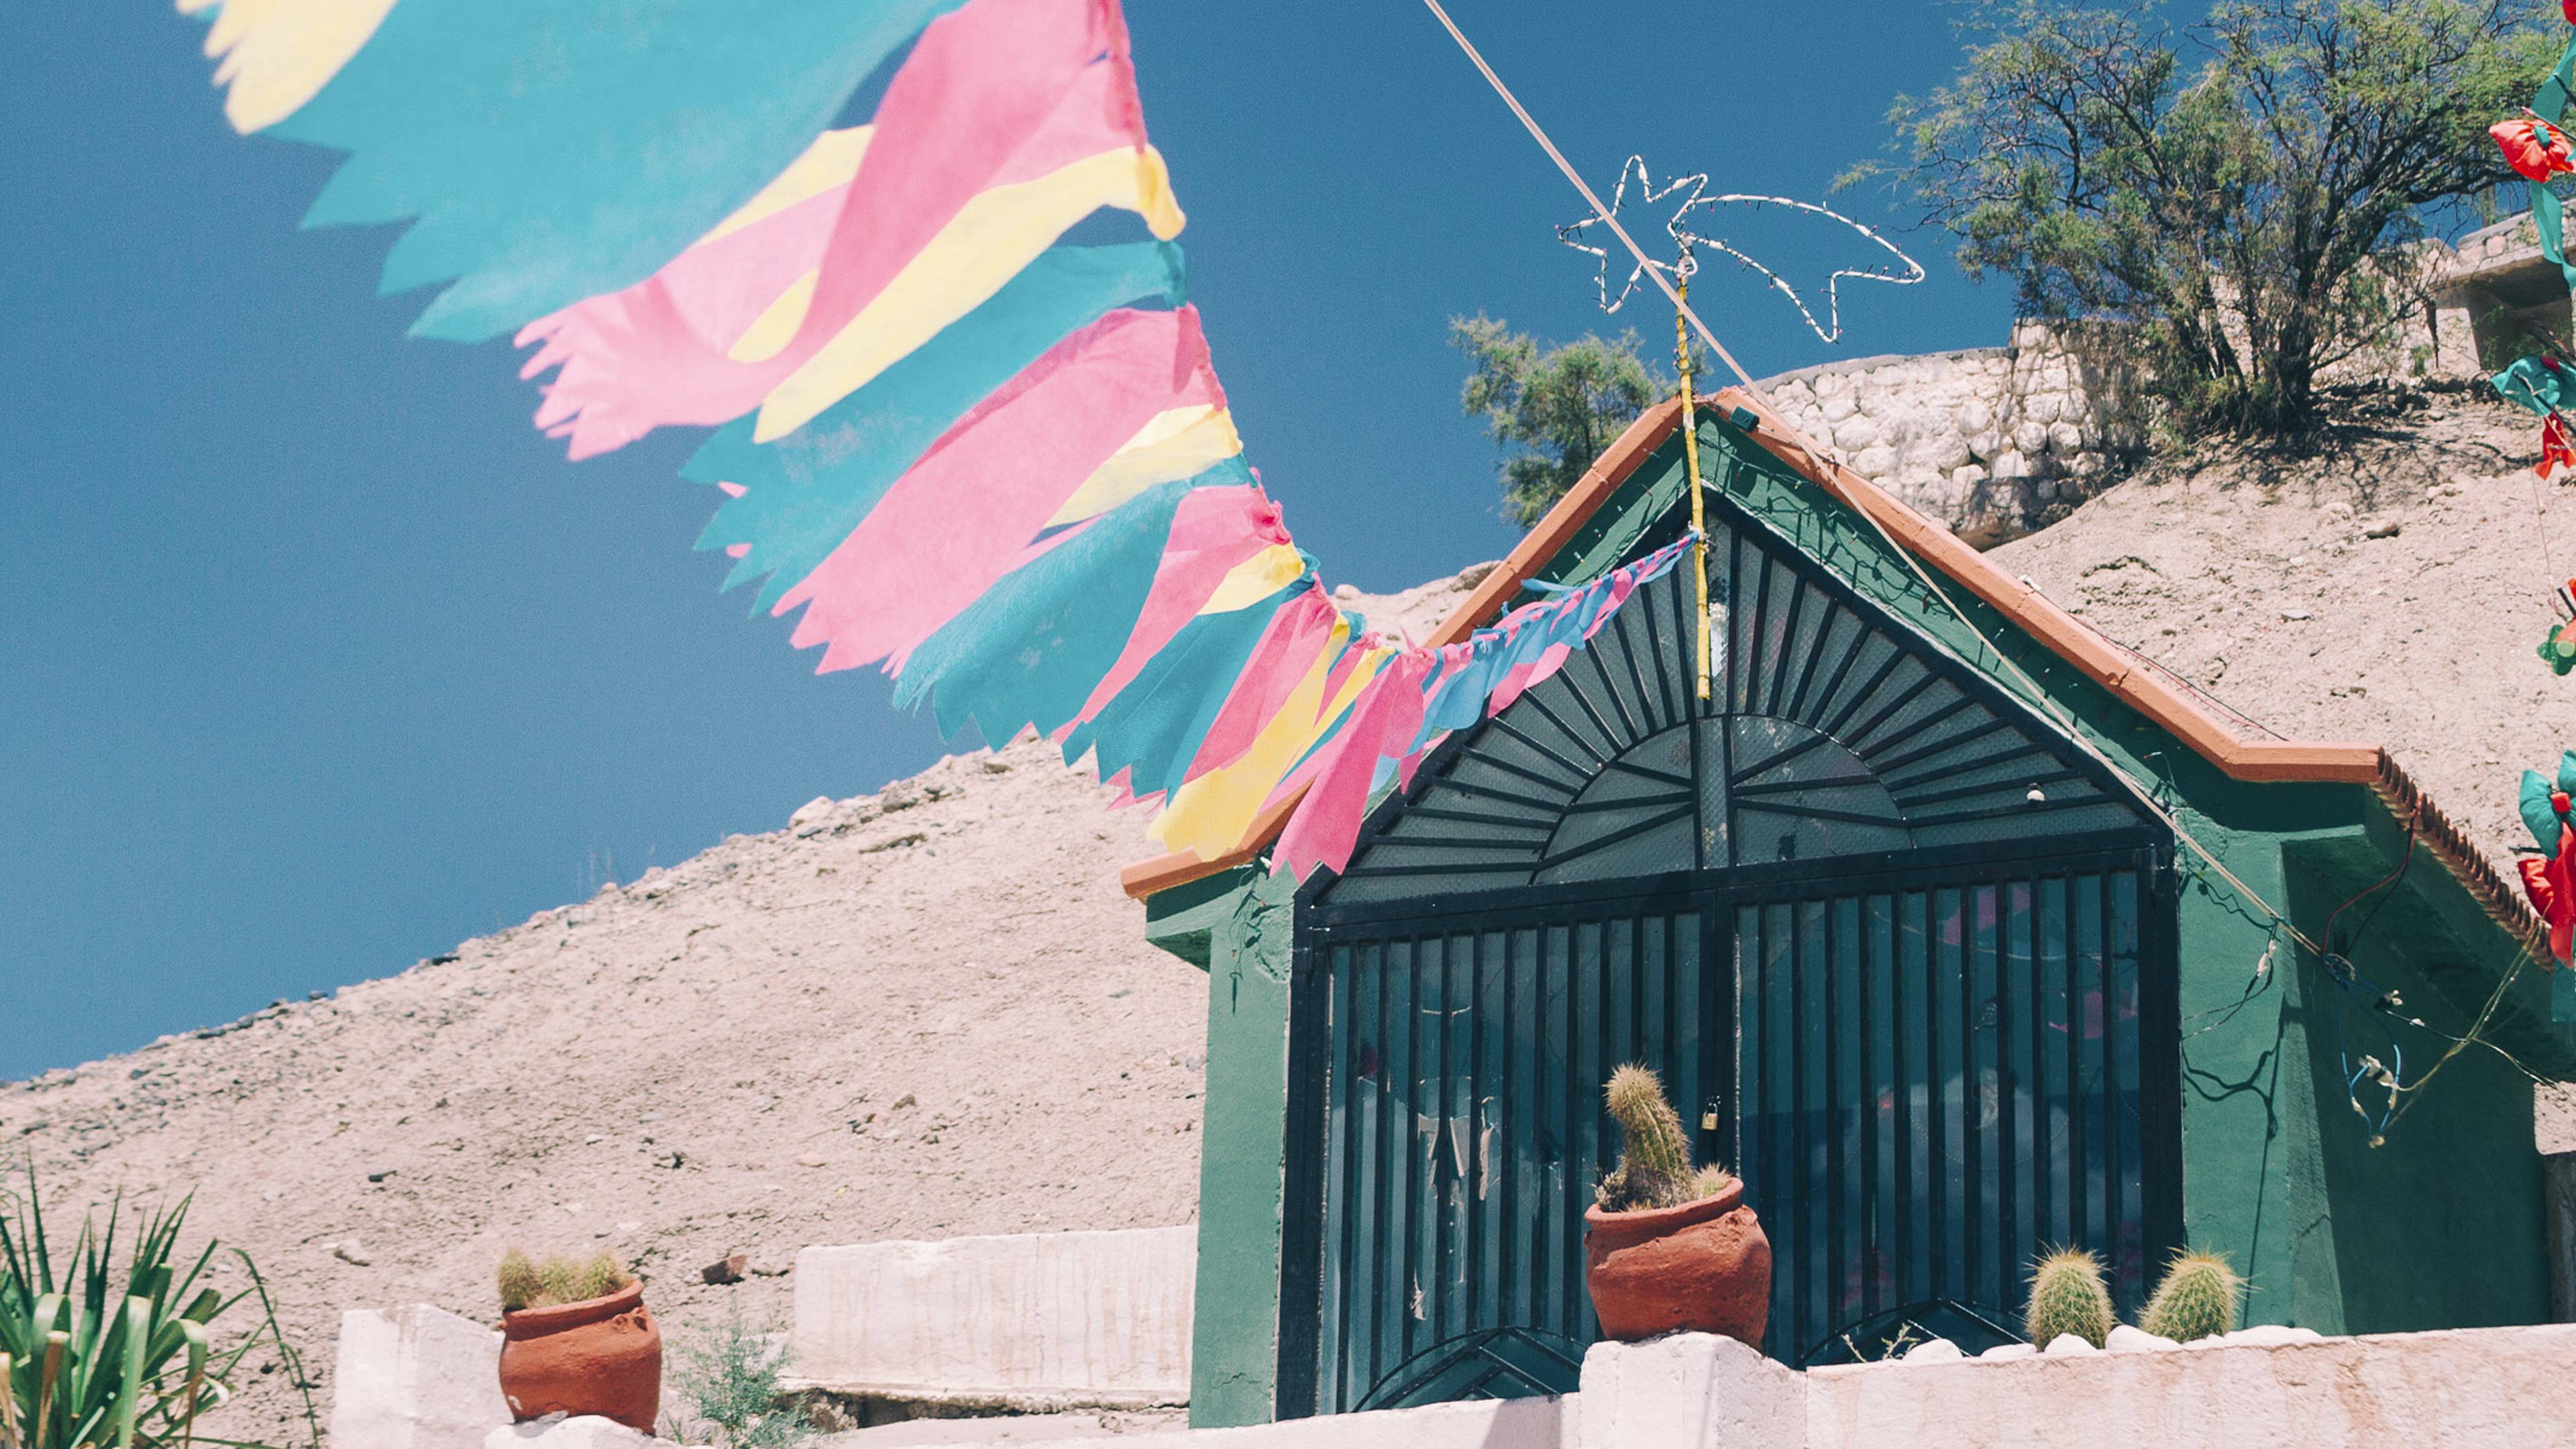 Little shrine with color pennants in Catamarca, Argentina